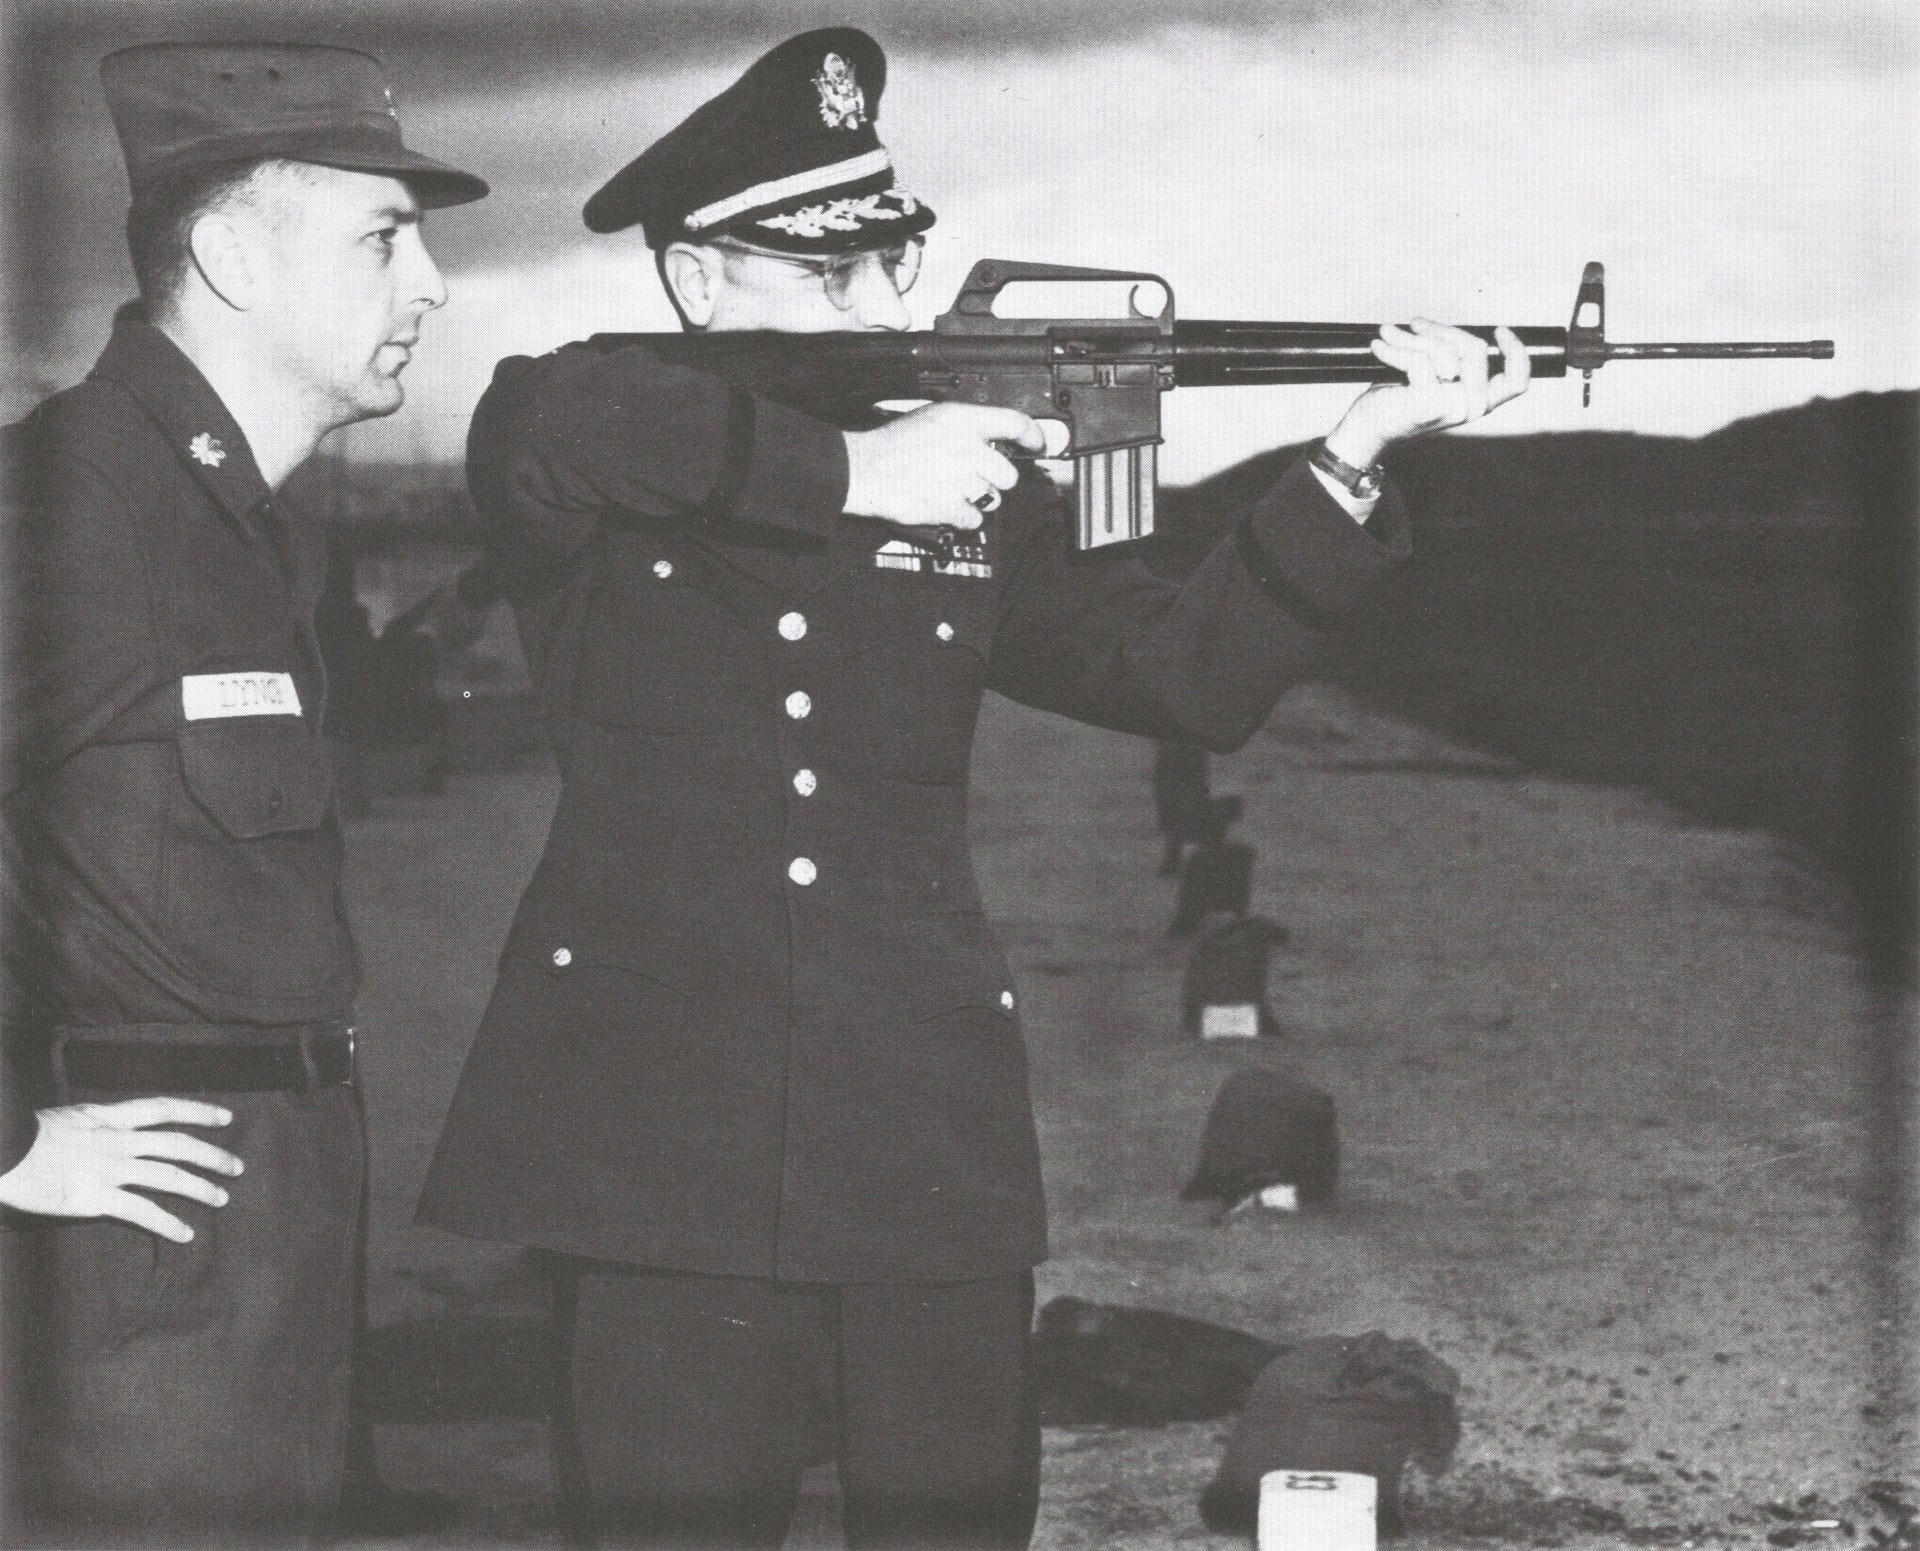 Major Eugene M. Lynch observes Lt. Col. Robert Vallendorf as he shoulders an ArmaLite prototype AR-15 (possibly S/N 000013) at Fort Benning on March 31, 1958. The rifle has no flash suppressor, but it is equipped with the AR-10 trigger type charging handle, one-piece cylindrical fiberglass handguard, and 25-round capacity magazine. U.S. Army photo